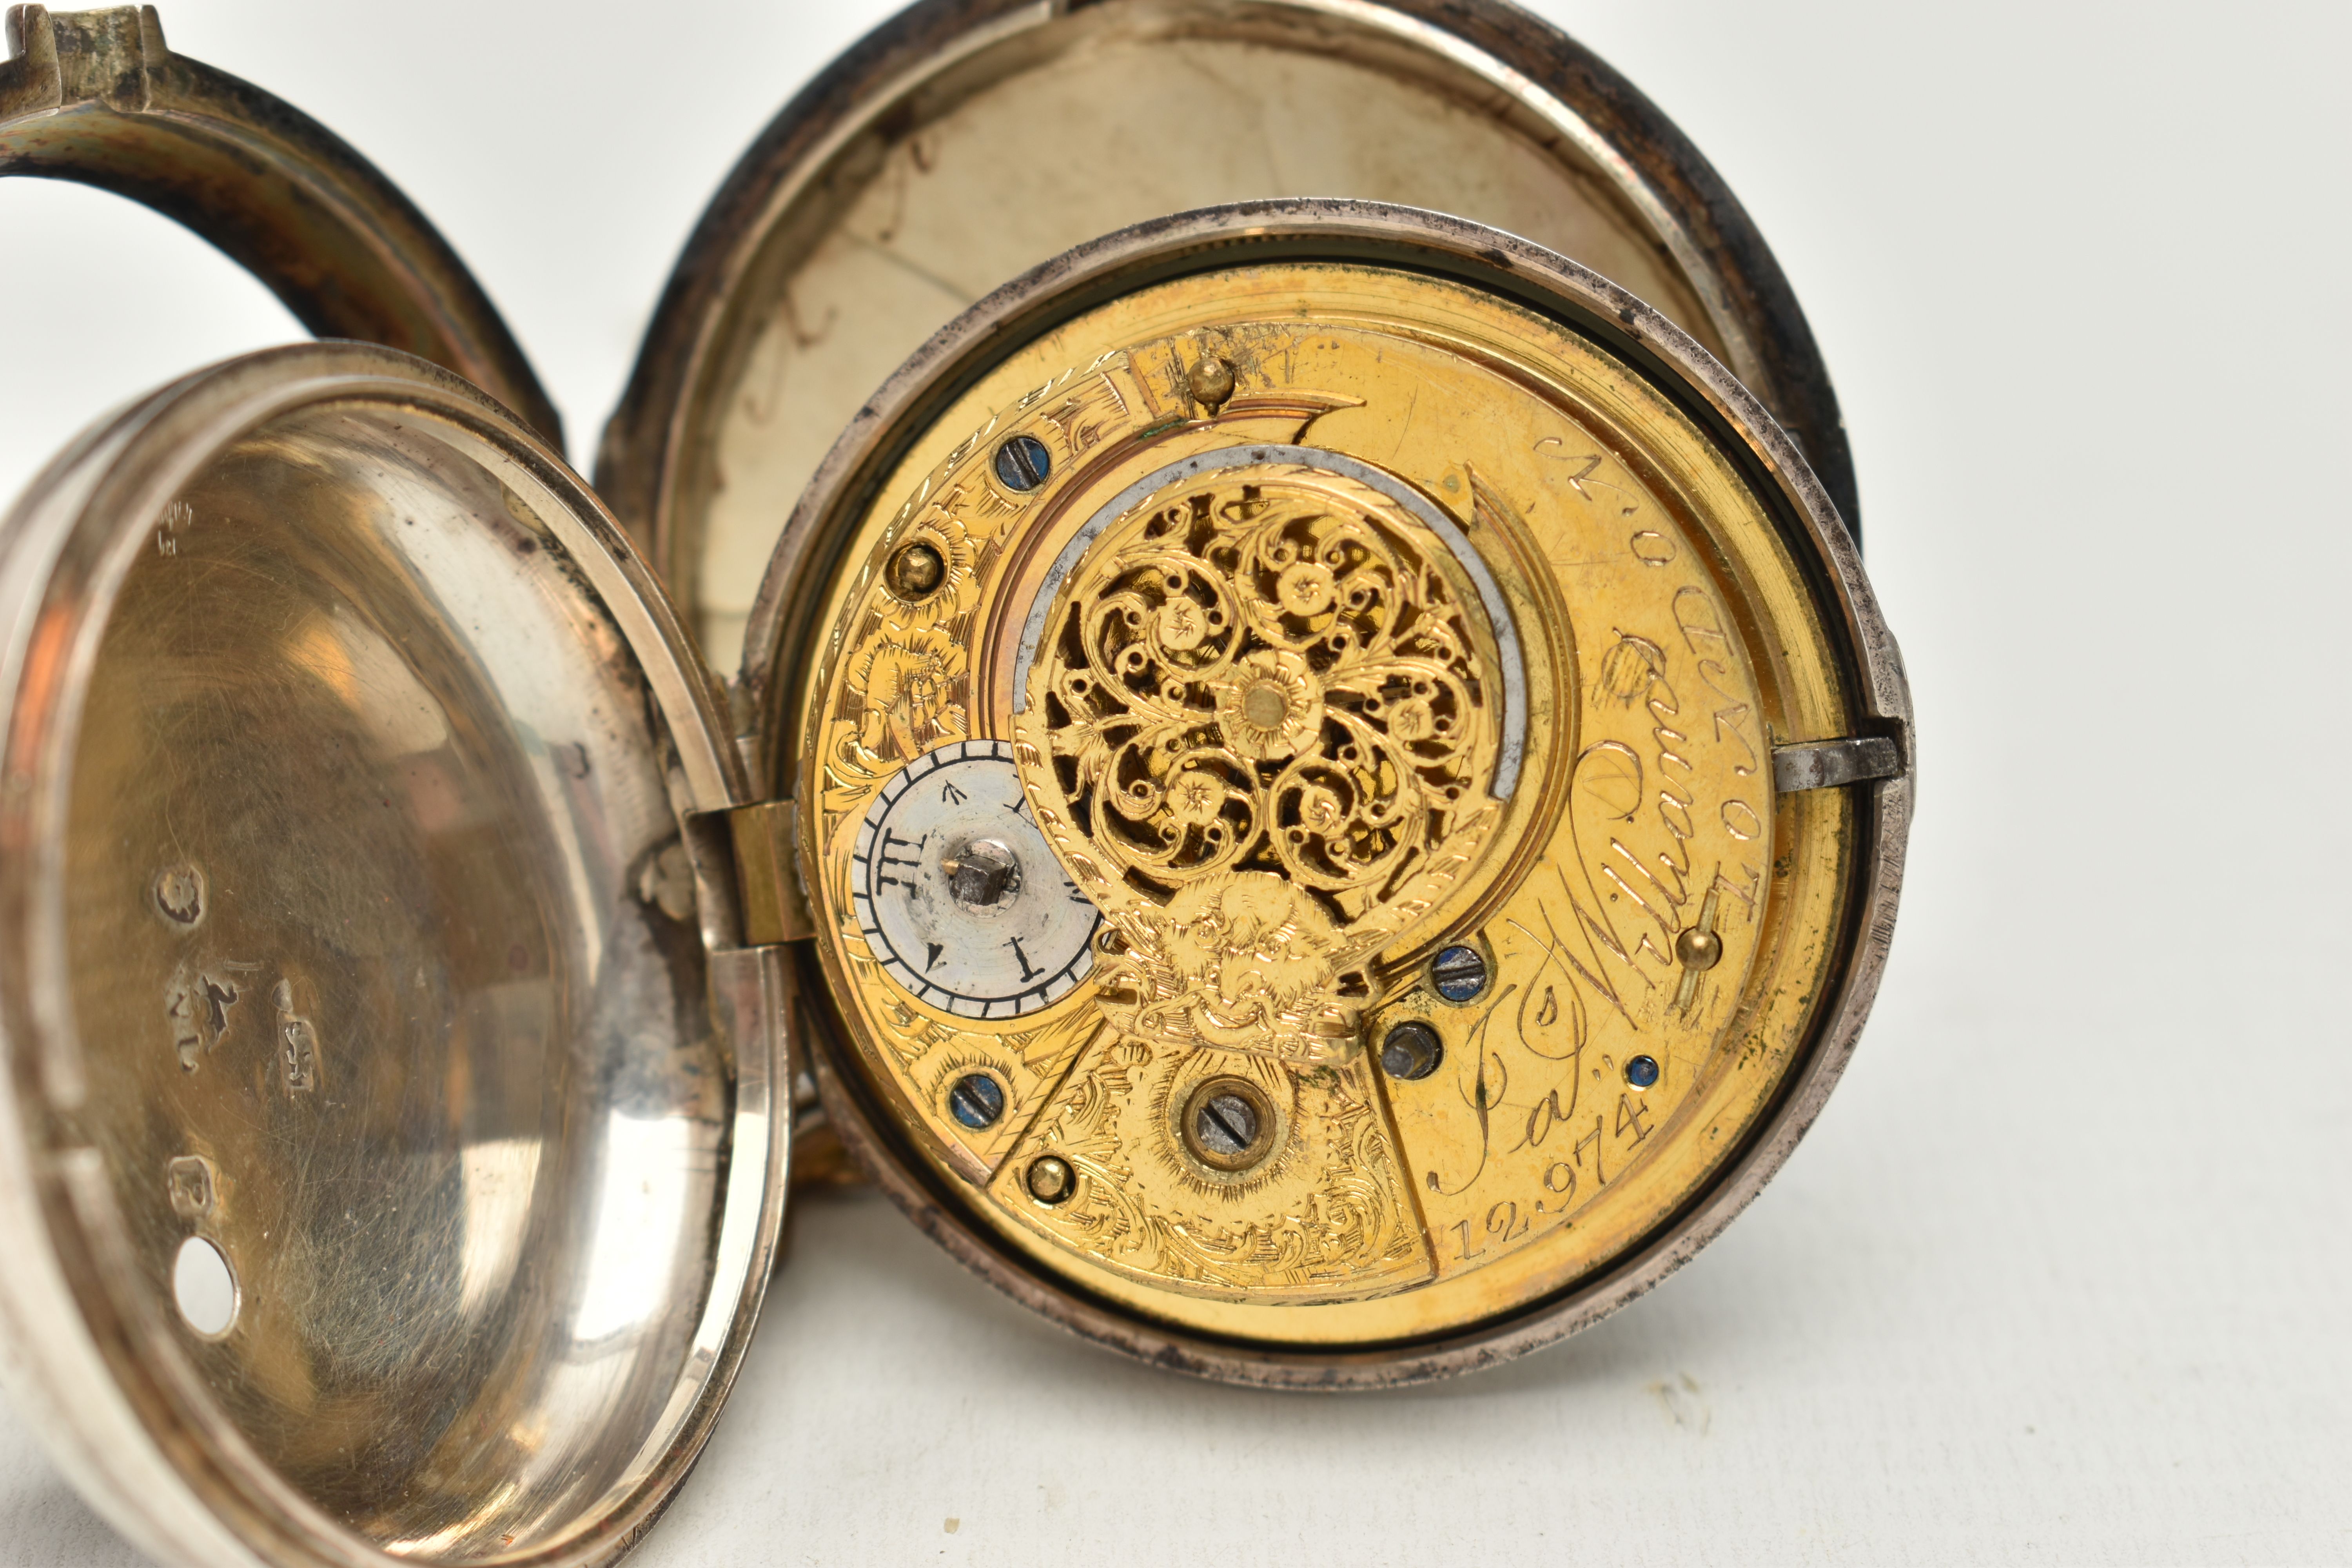 A GEORGE III SILVER PAIR CASED POCKET WATCH, the white enamel dial with Arabic numerals, painted - Image 7 of 9